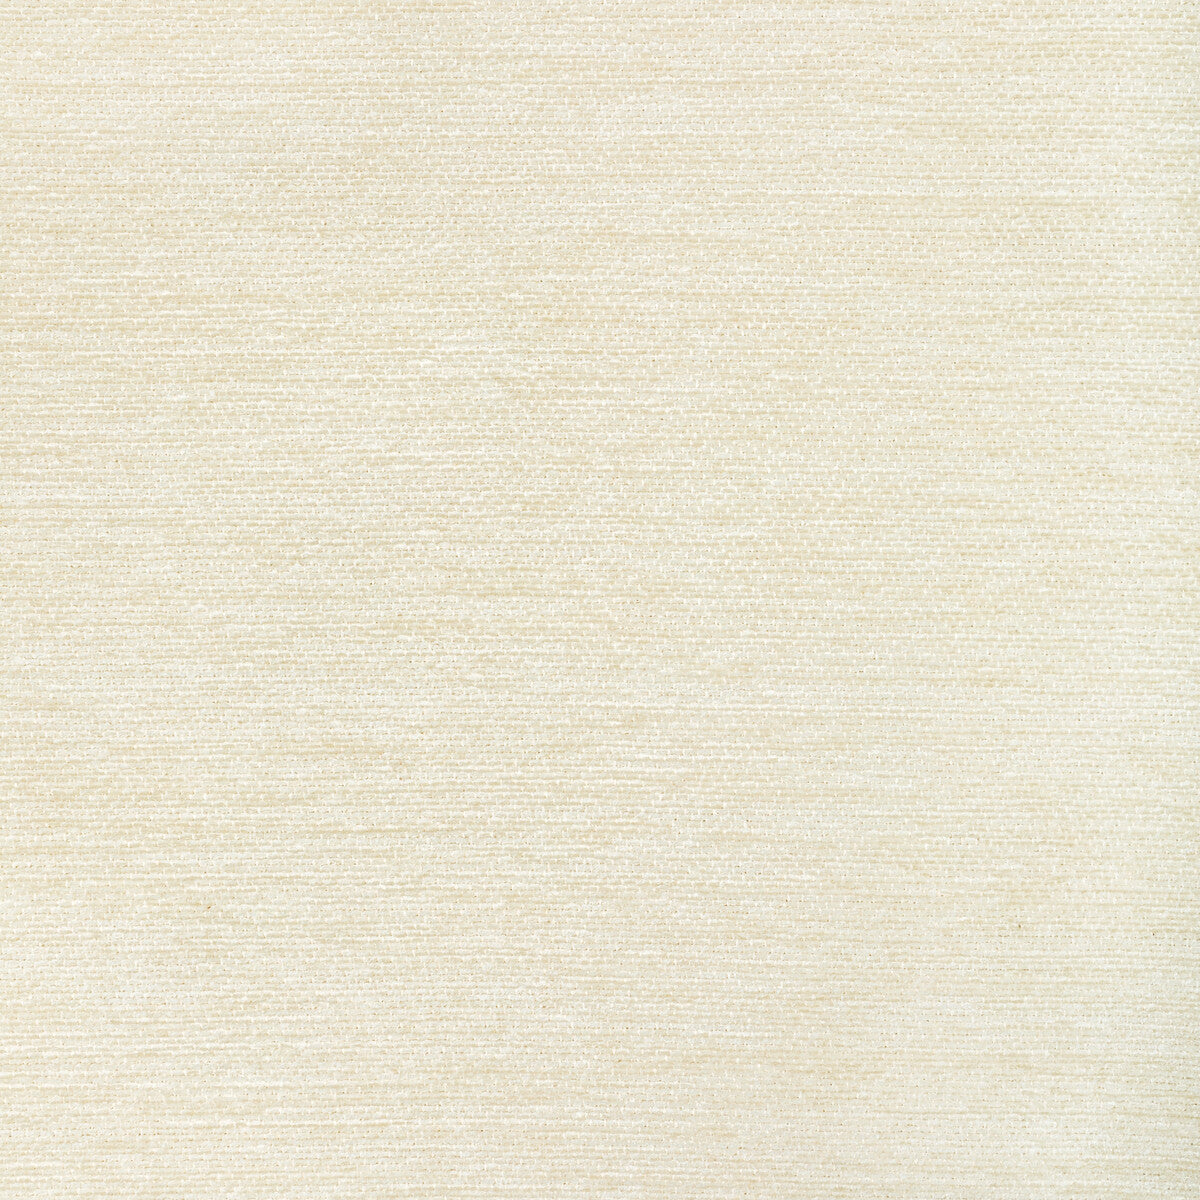 Cognin Texture fabric in ivory color - pattern 8022126.1.0 - by Brunschwig &amp; Fils in the Chambery Textures III collection